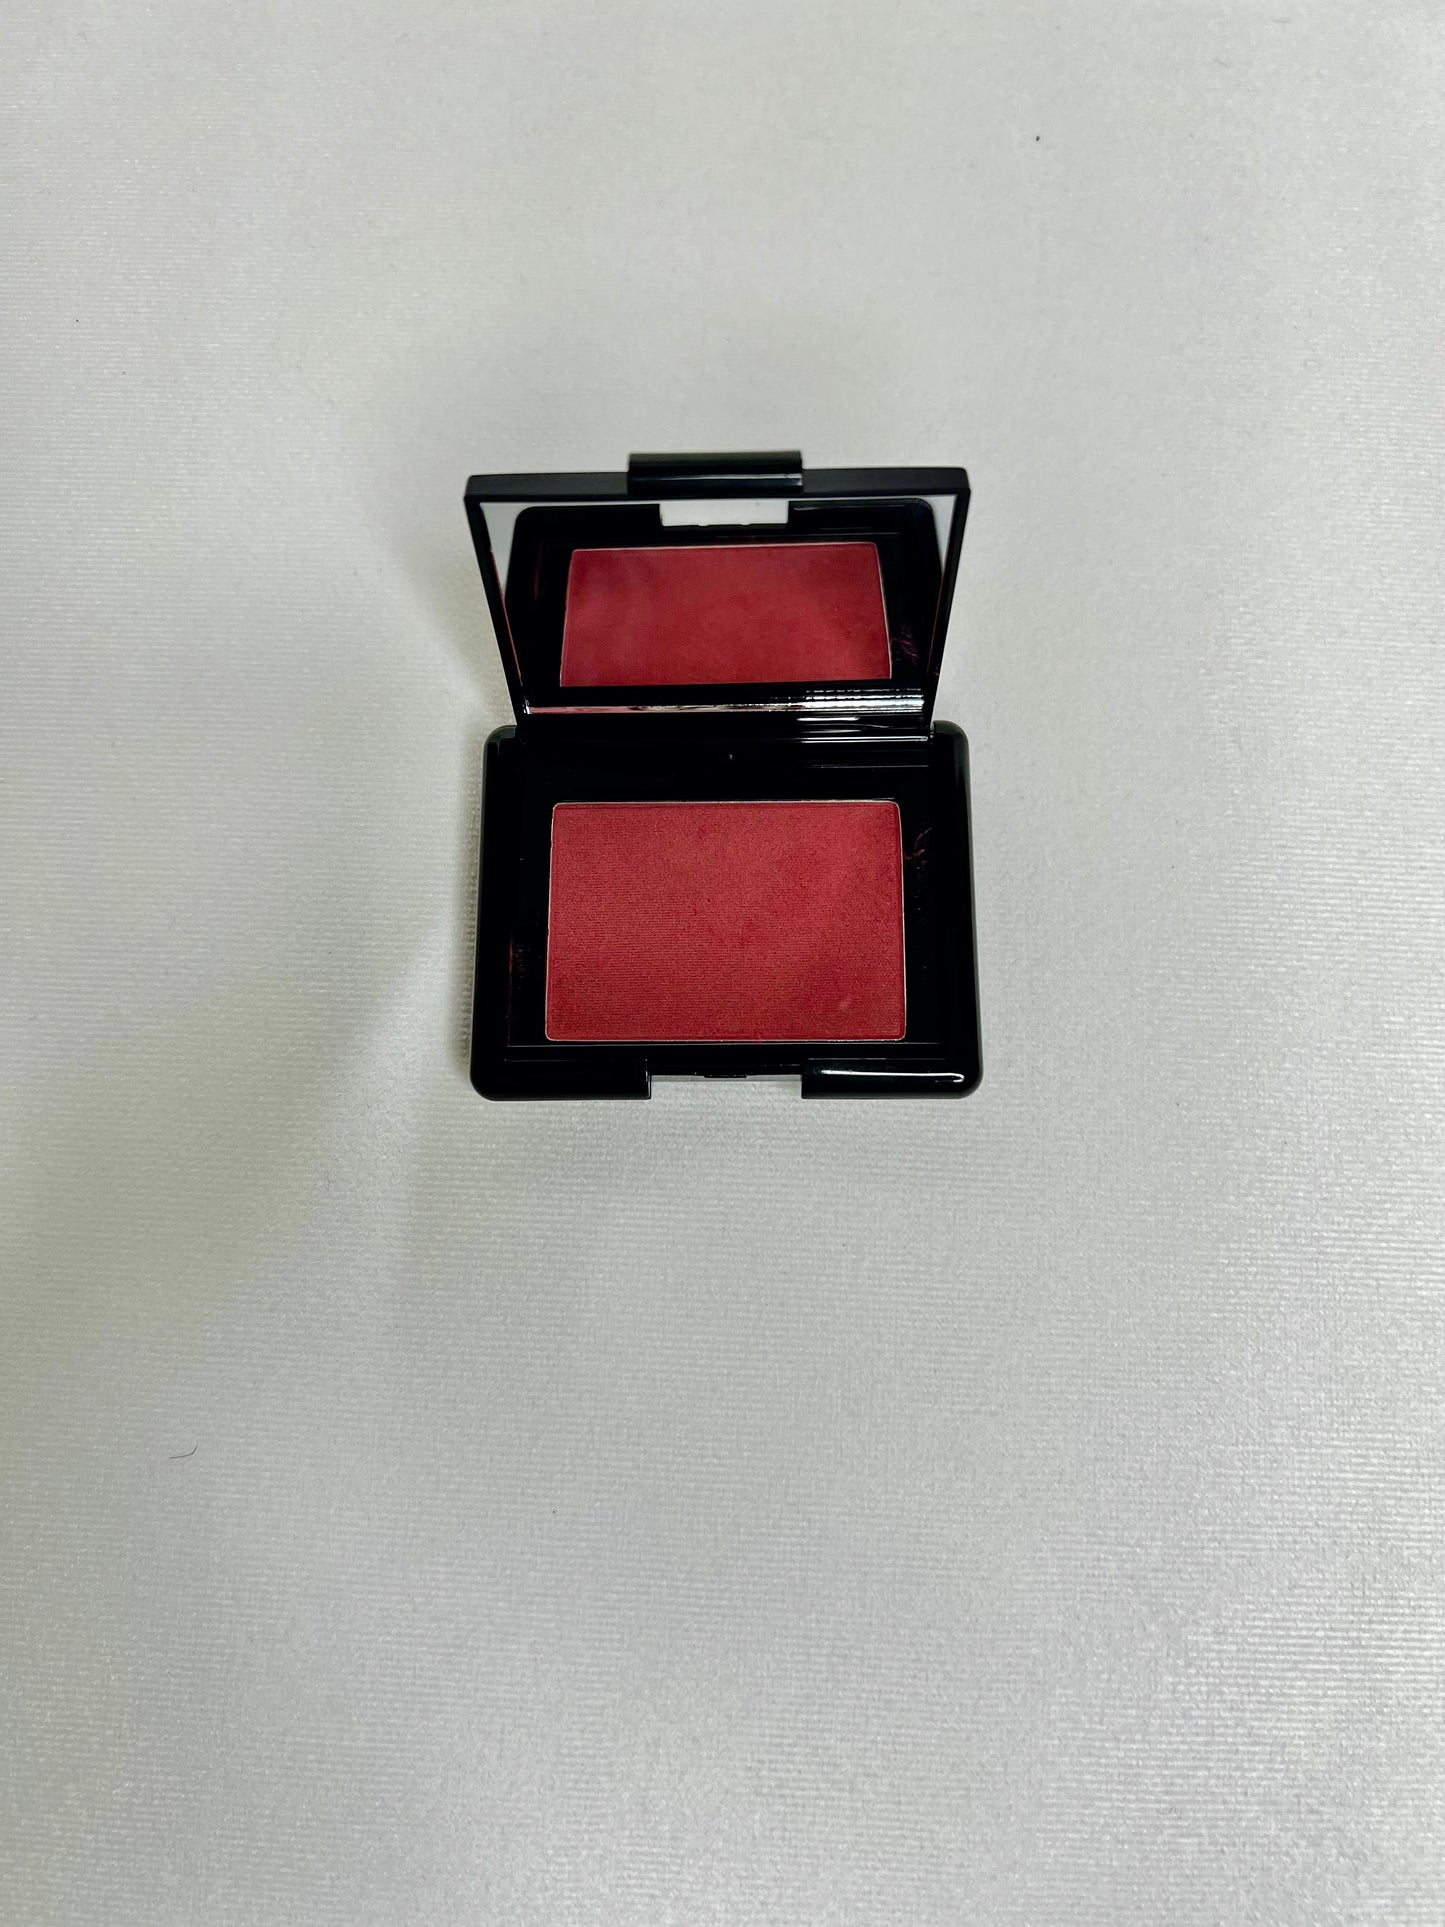 Paraben Free / EU Compliant / Gluten Free and Vegan /Cruelty Free   Rectangle: Net Wt. 5 g / .17 oz.  This rich, intense color blush can be used to shade, brighten, enhance, and define the shape of your face. The formula glides on soft resulting in a picture perfect finish.